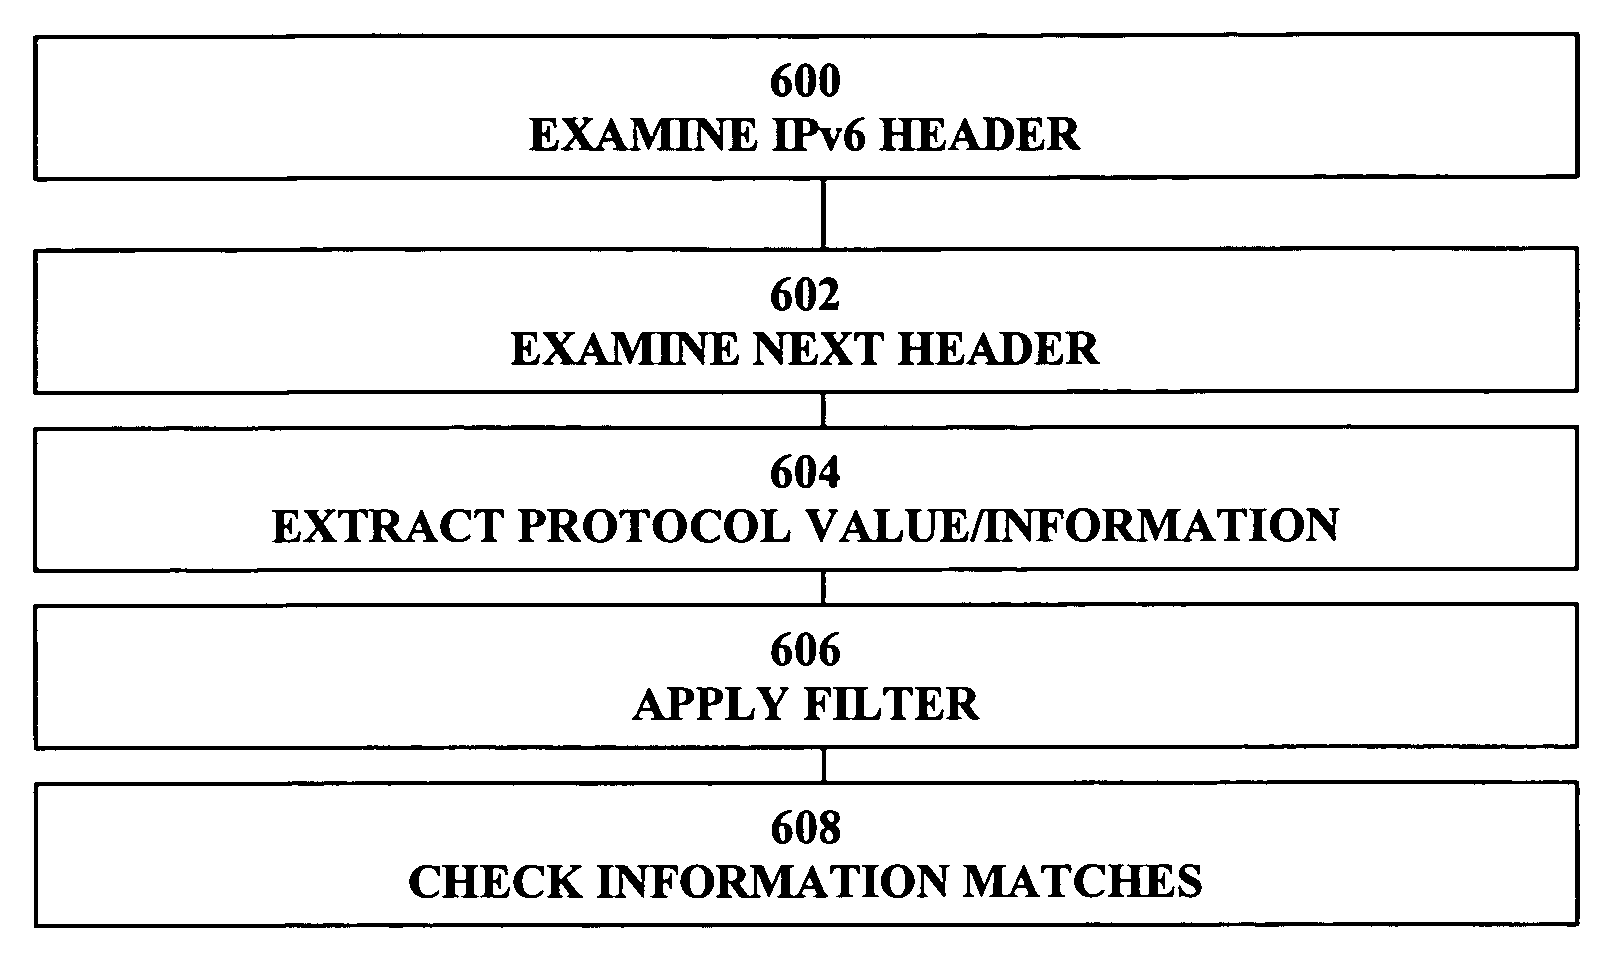 Classifying data packet protocol values